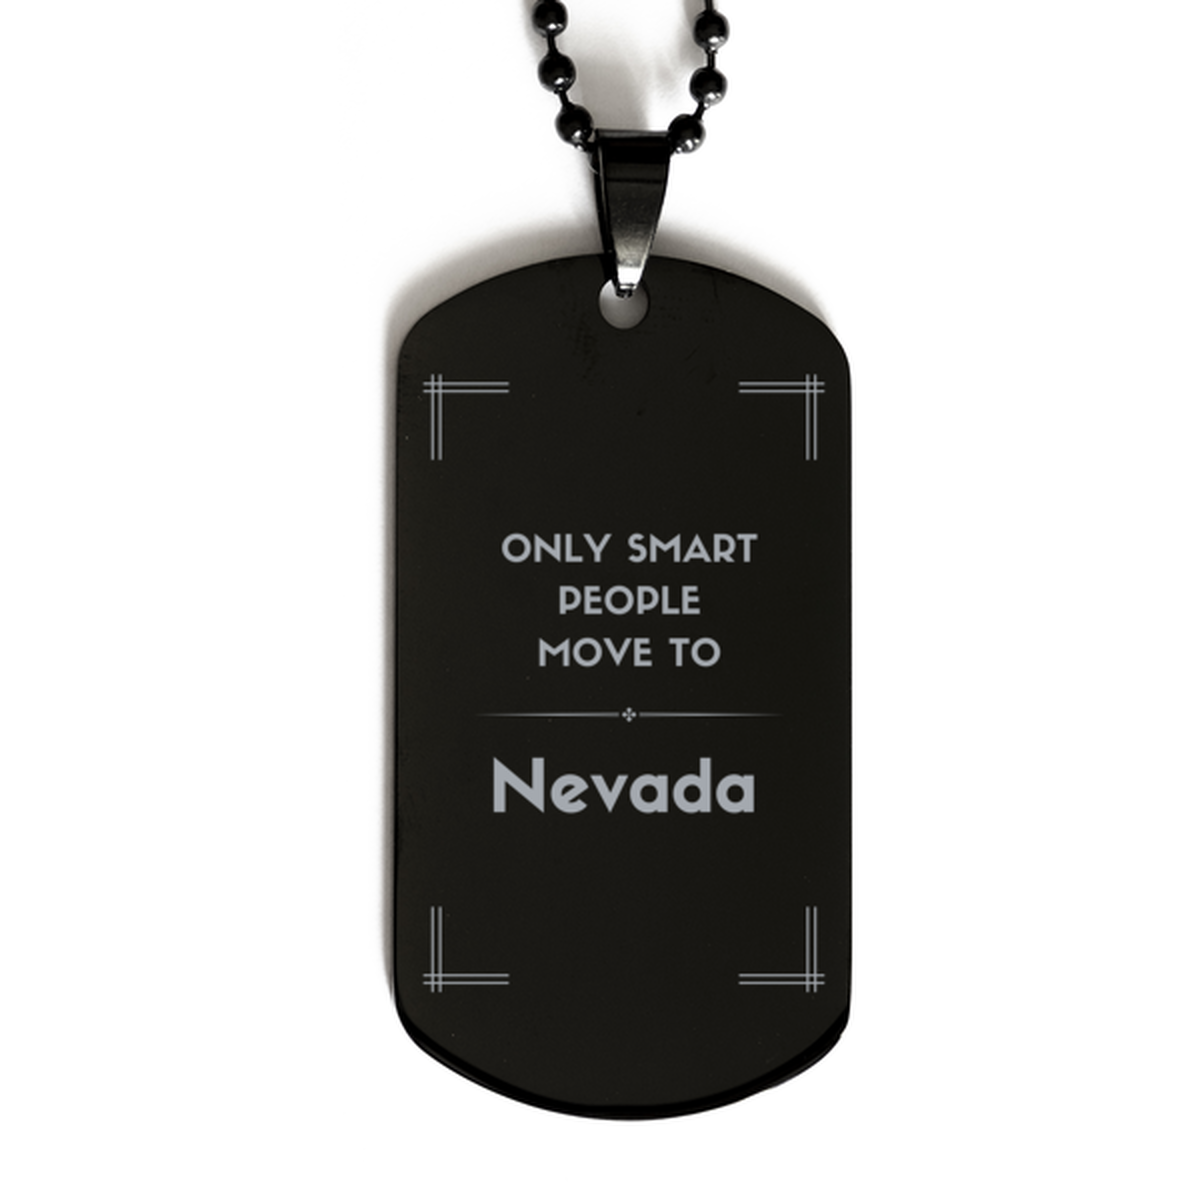 Only smart people move to Nevada Black Dog Tag, Gag Gifts For Nevada, Move to Nevada Gifts for Friends Coworker Funny Saying Quote